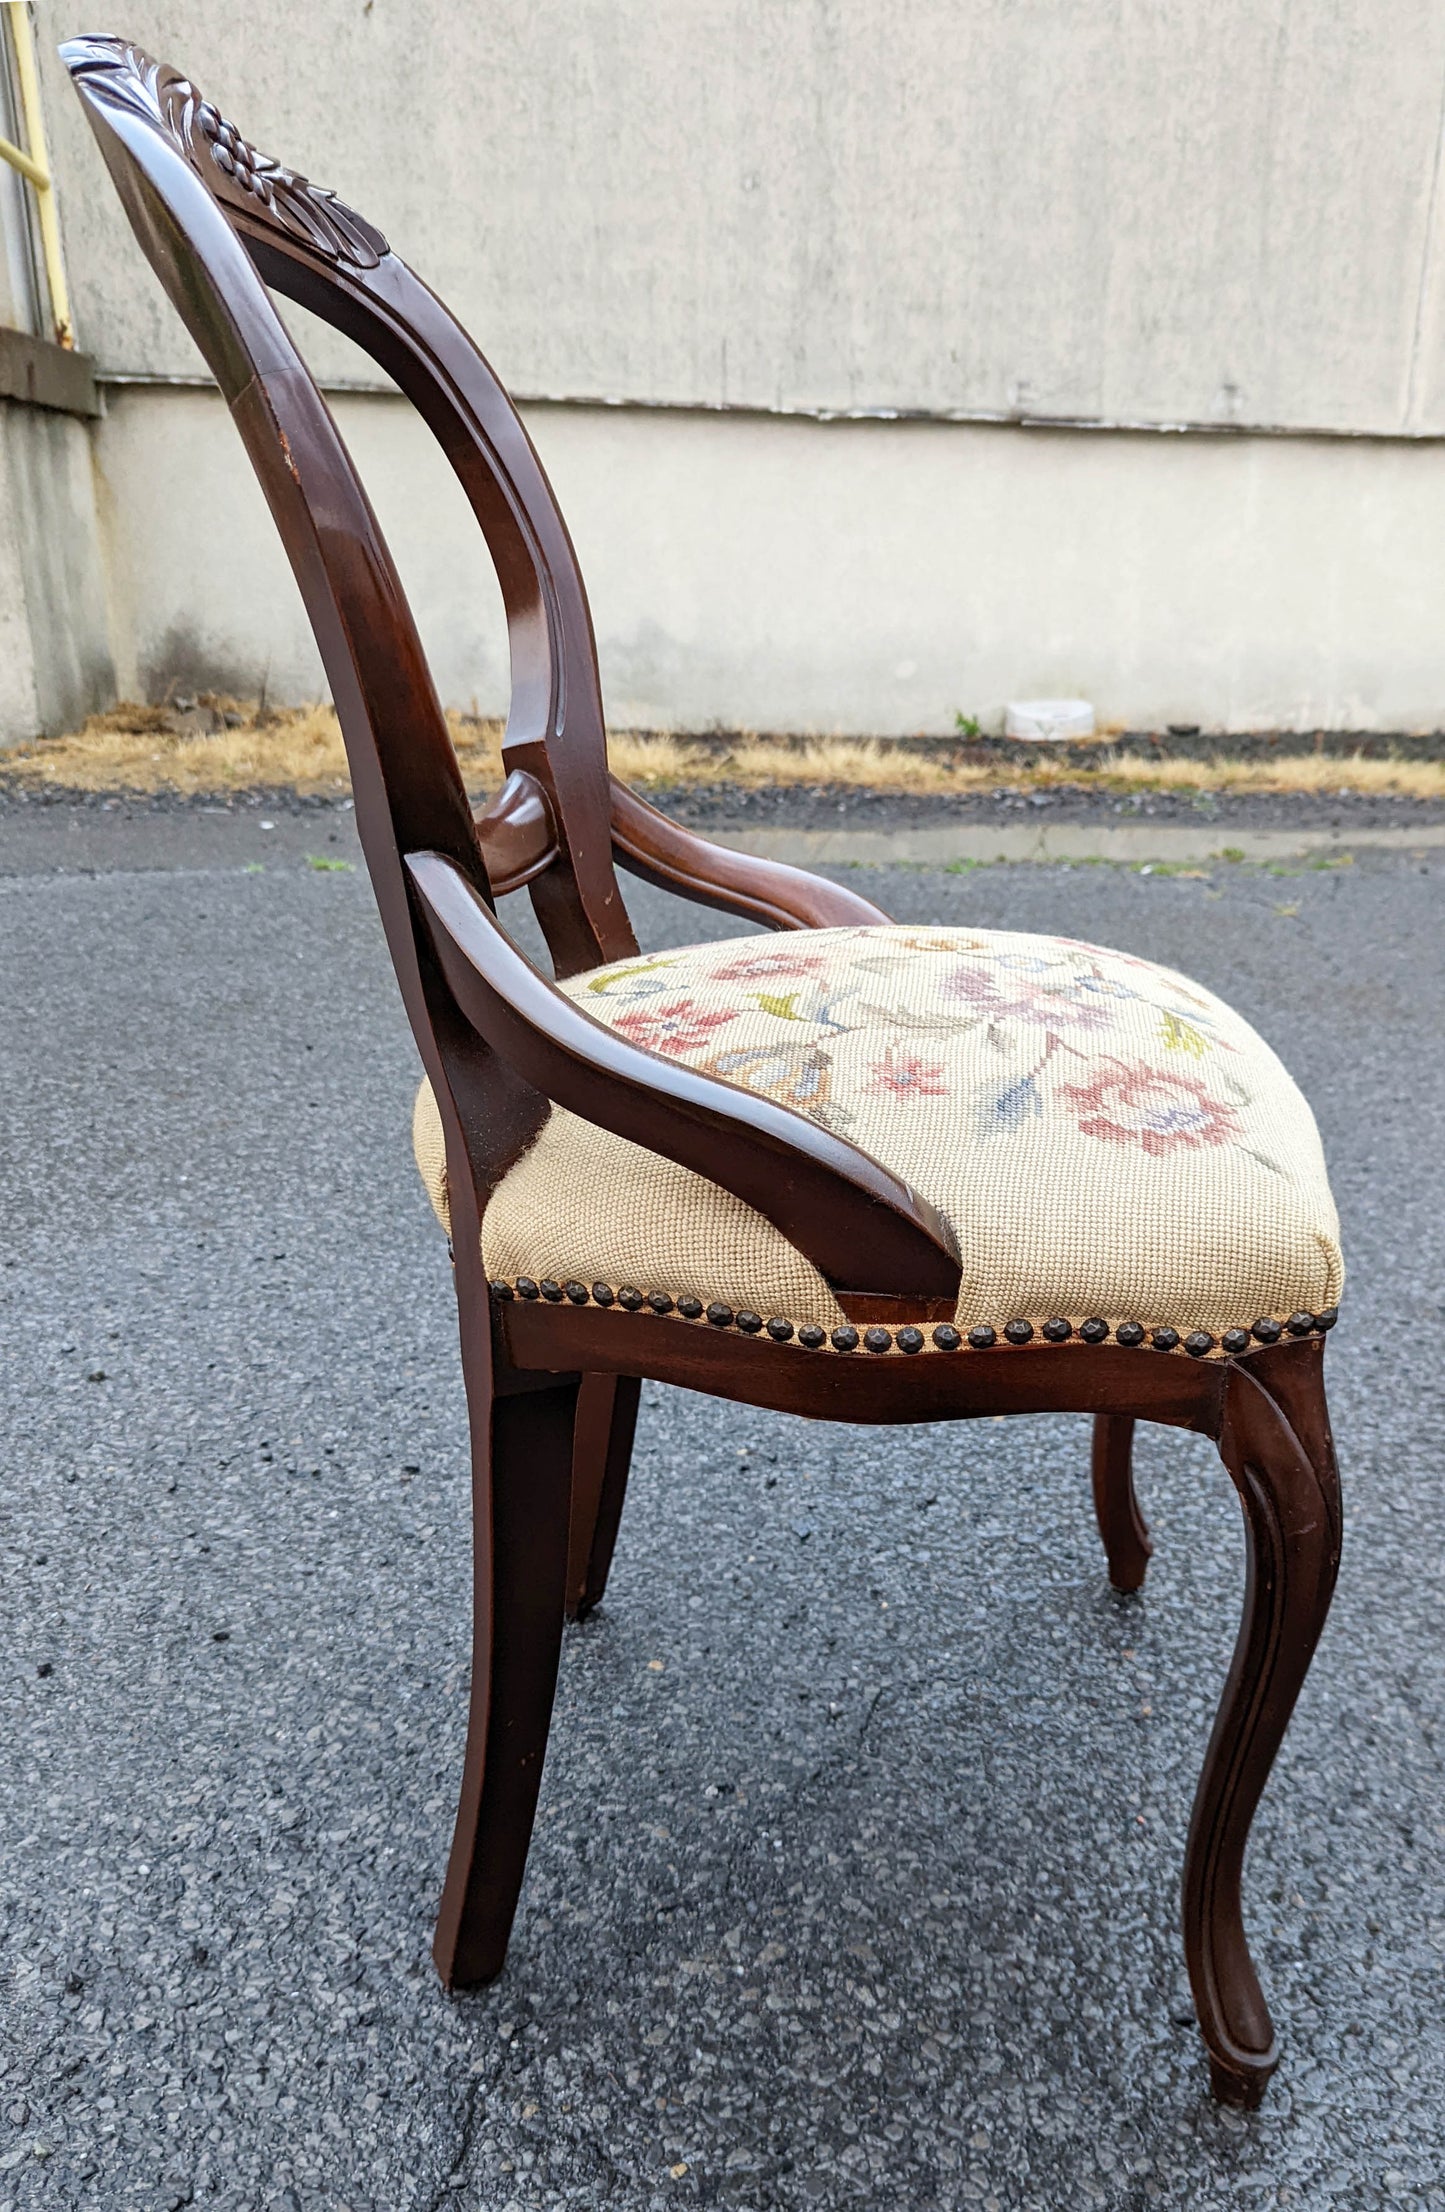 Antique Vintage Old Victorian Carved SOLID Walnut Mahogany Wood Wooden Floral Fabric Side Dining Accent Chair Ottoman Foot Stool Bench